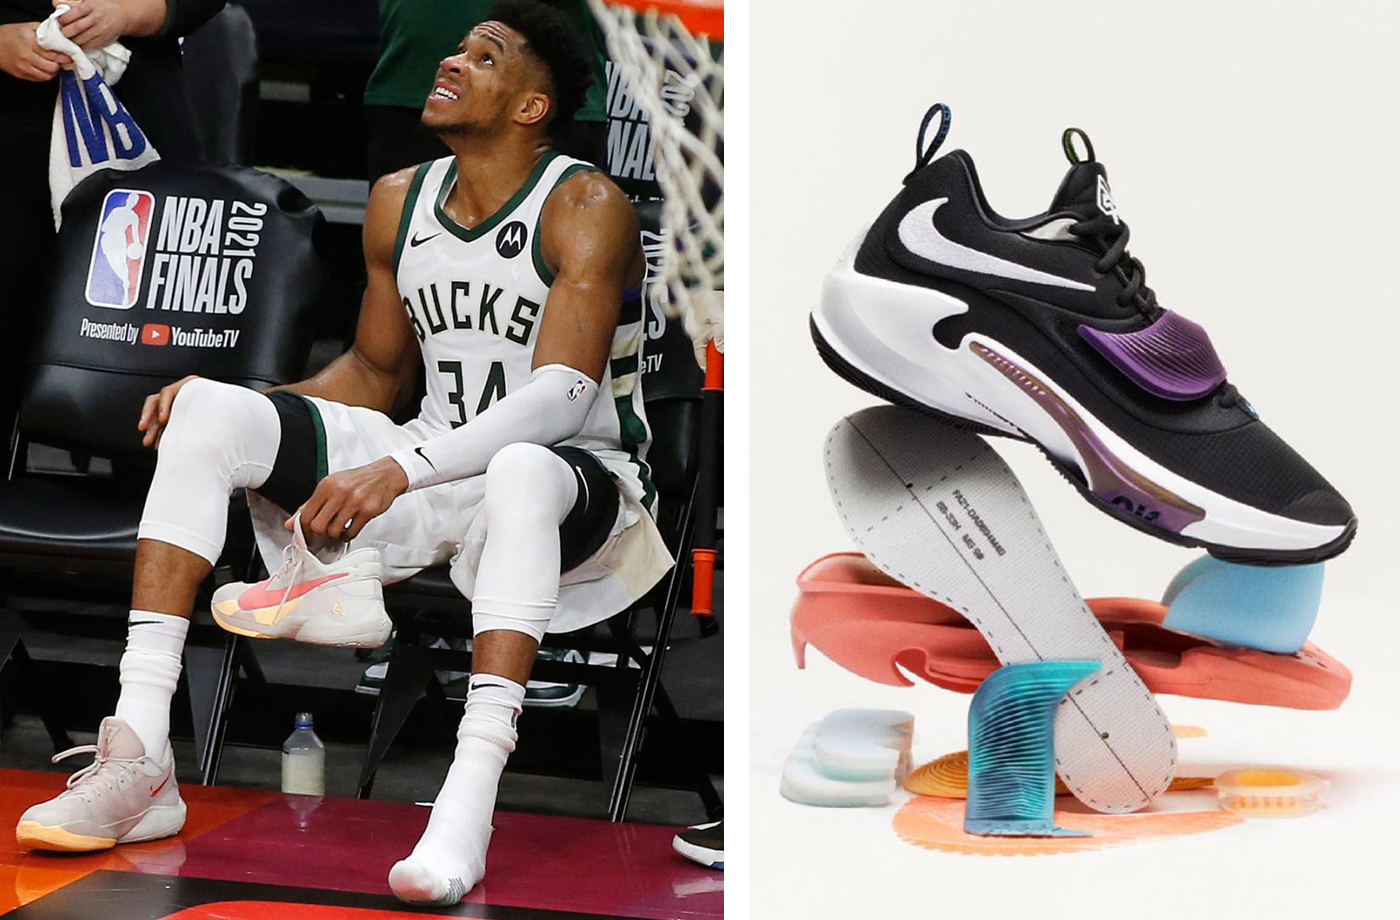 Is It Time to Rethink the Signature Shoe Cycle? | SoleSavy News